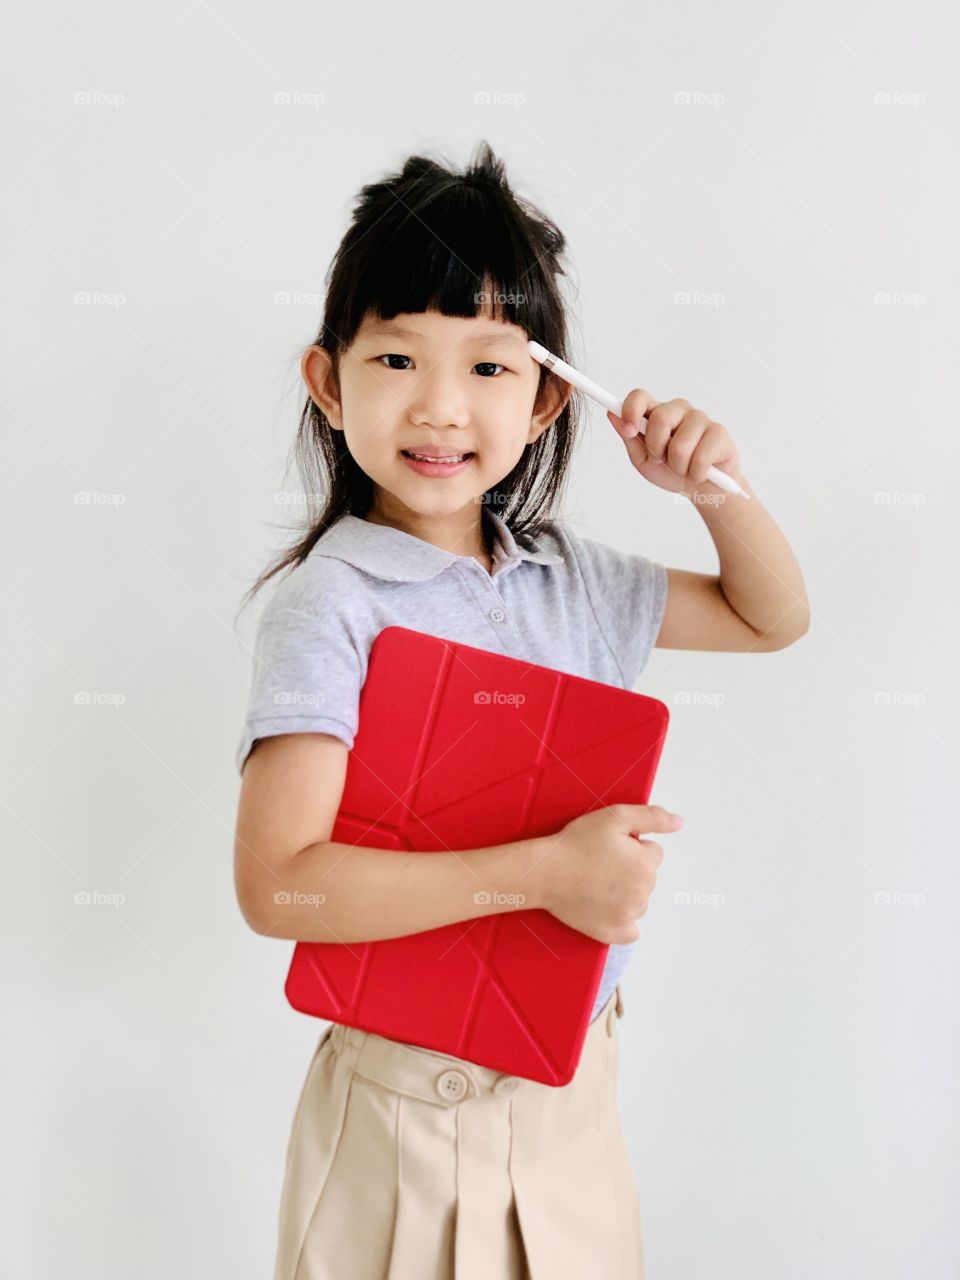 A little girl holding a tablet ready to go to school.  concept back to school.